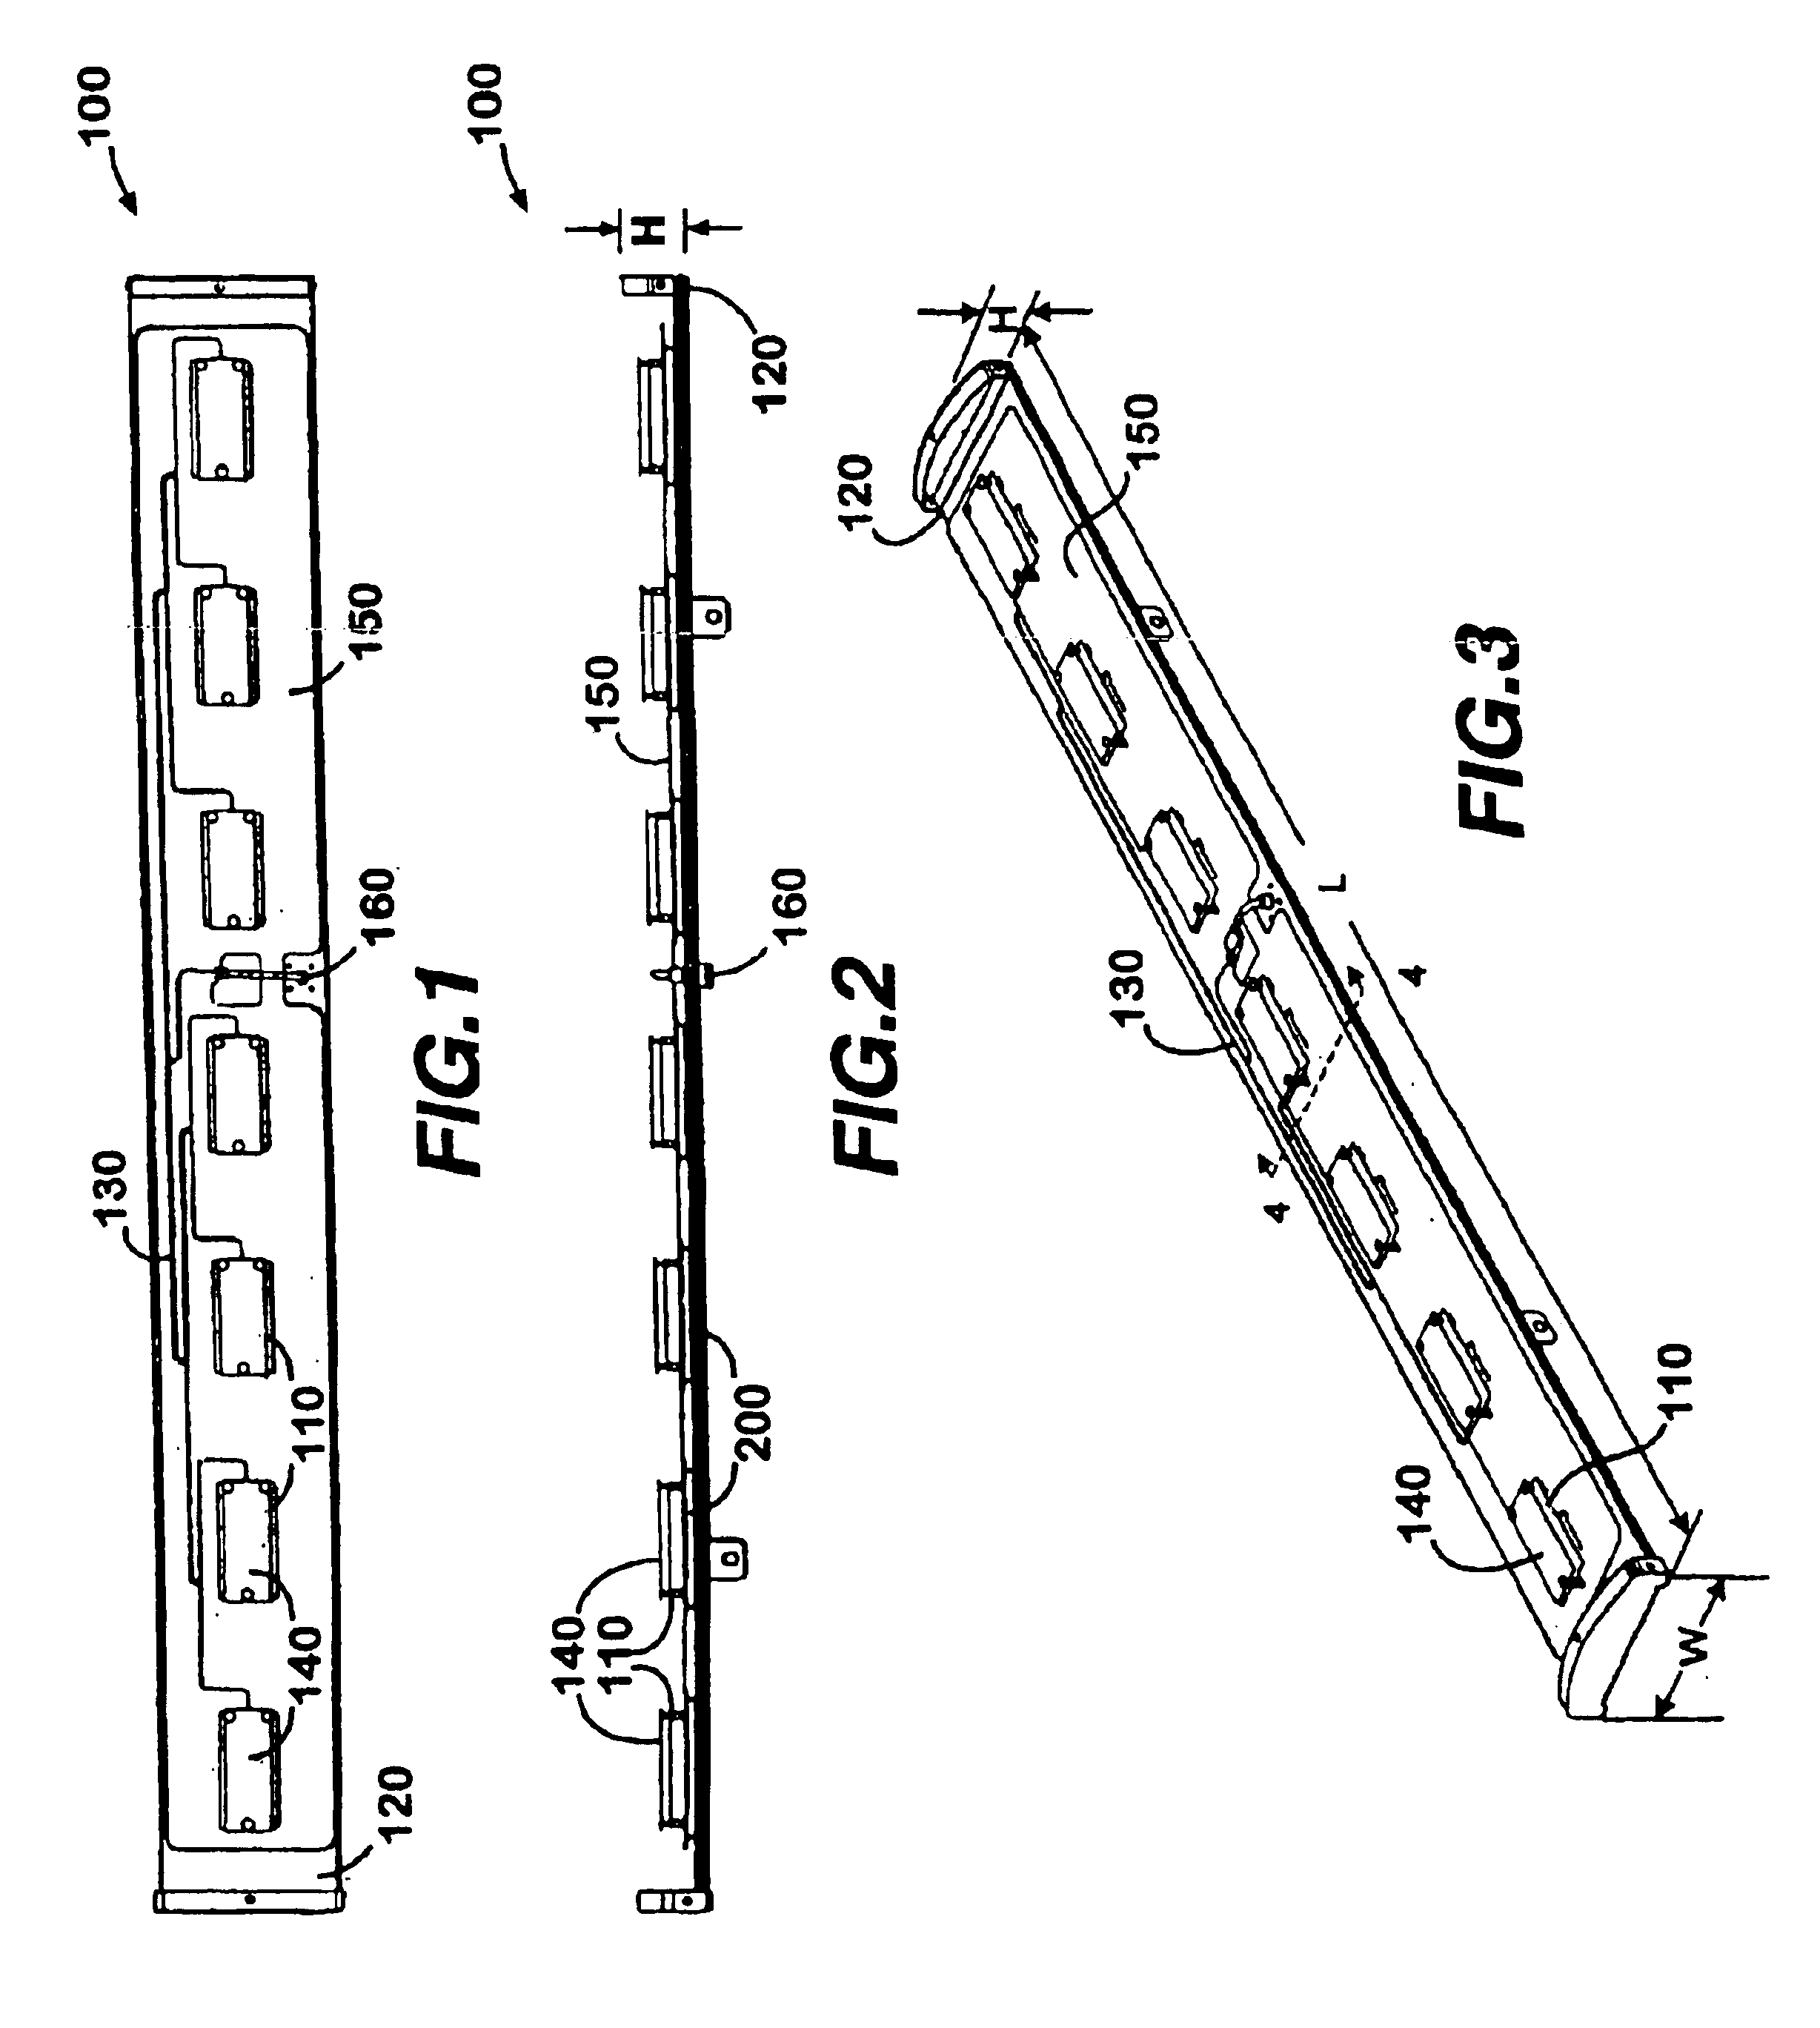 Aperture Coupled Cavity Backed Patch Antenna